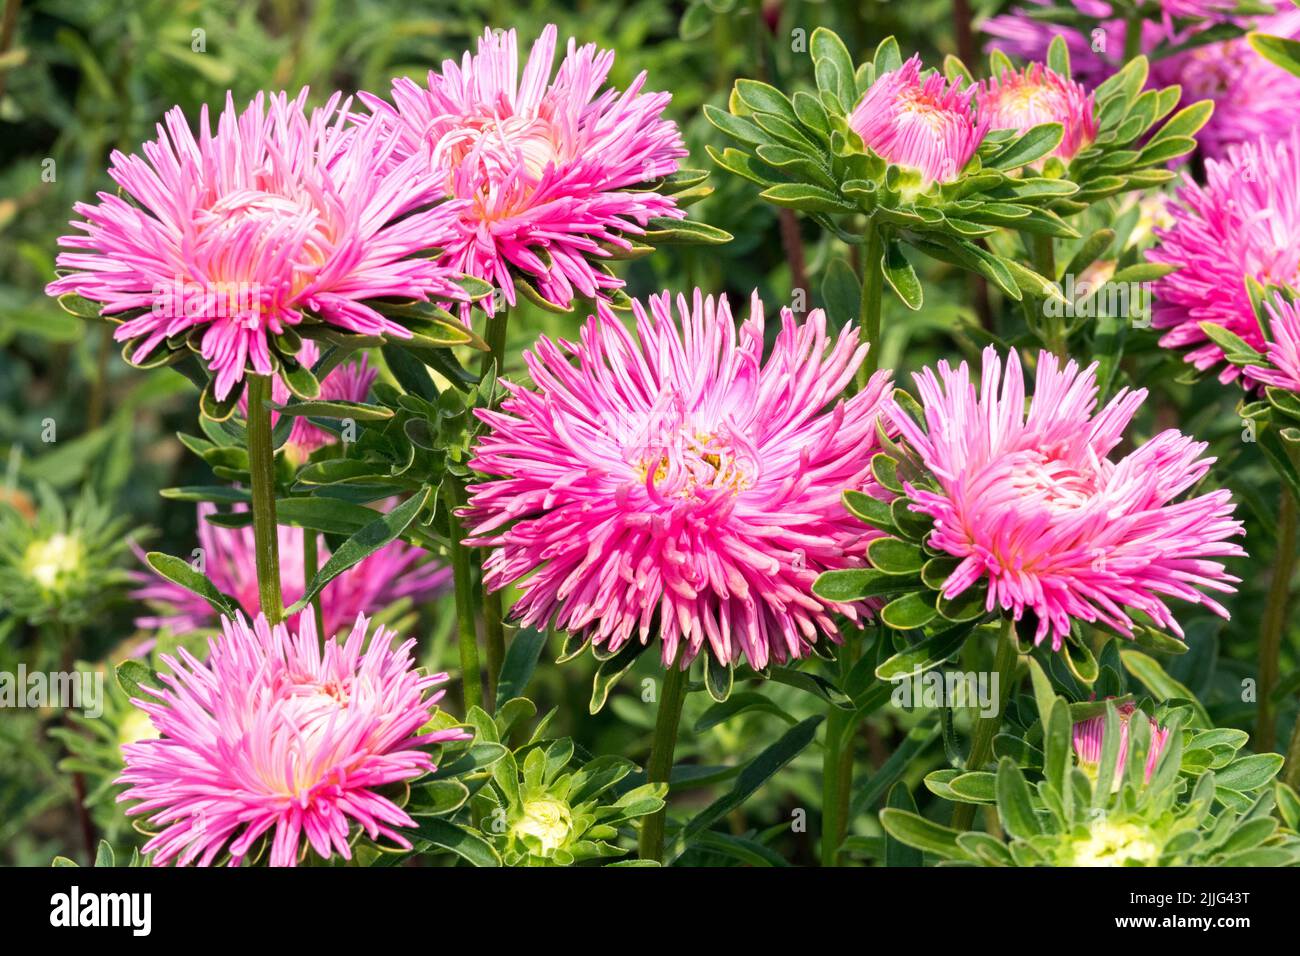 Beautiful Pink Asters, Herbaceous, Flowers, Garden, Annuals, Aster, Callistephus chinensis, China Aster Stock Photo